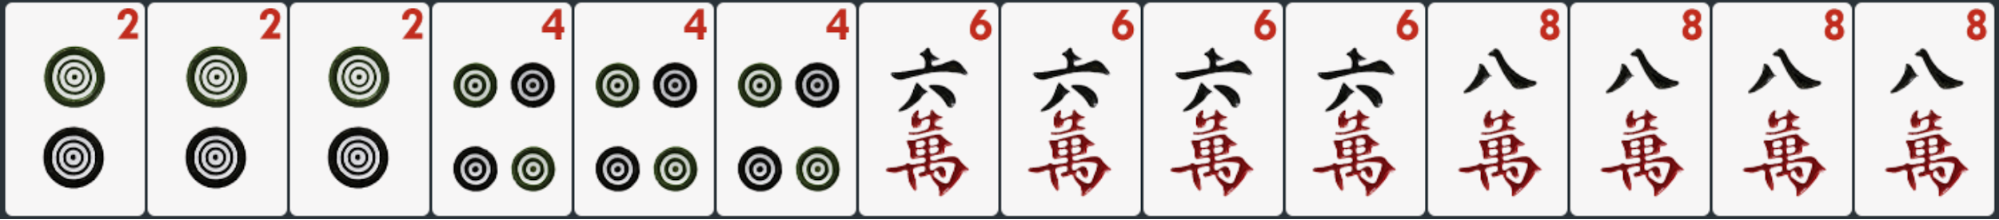 Mah Jongg hand with even numbers in 2 suits